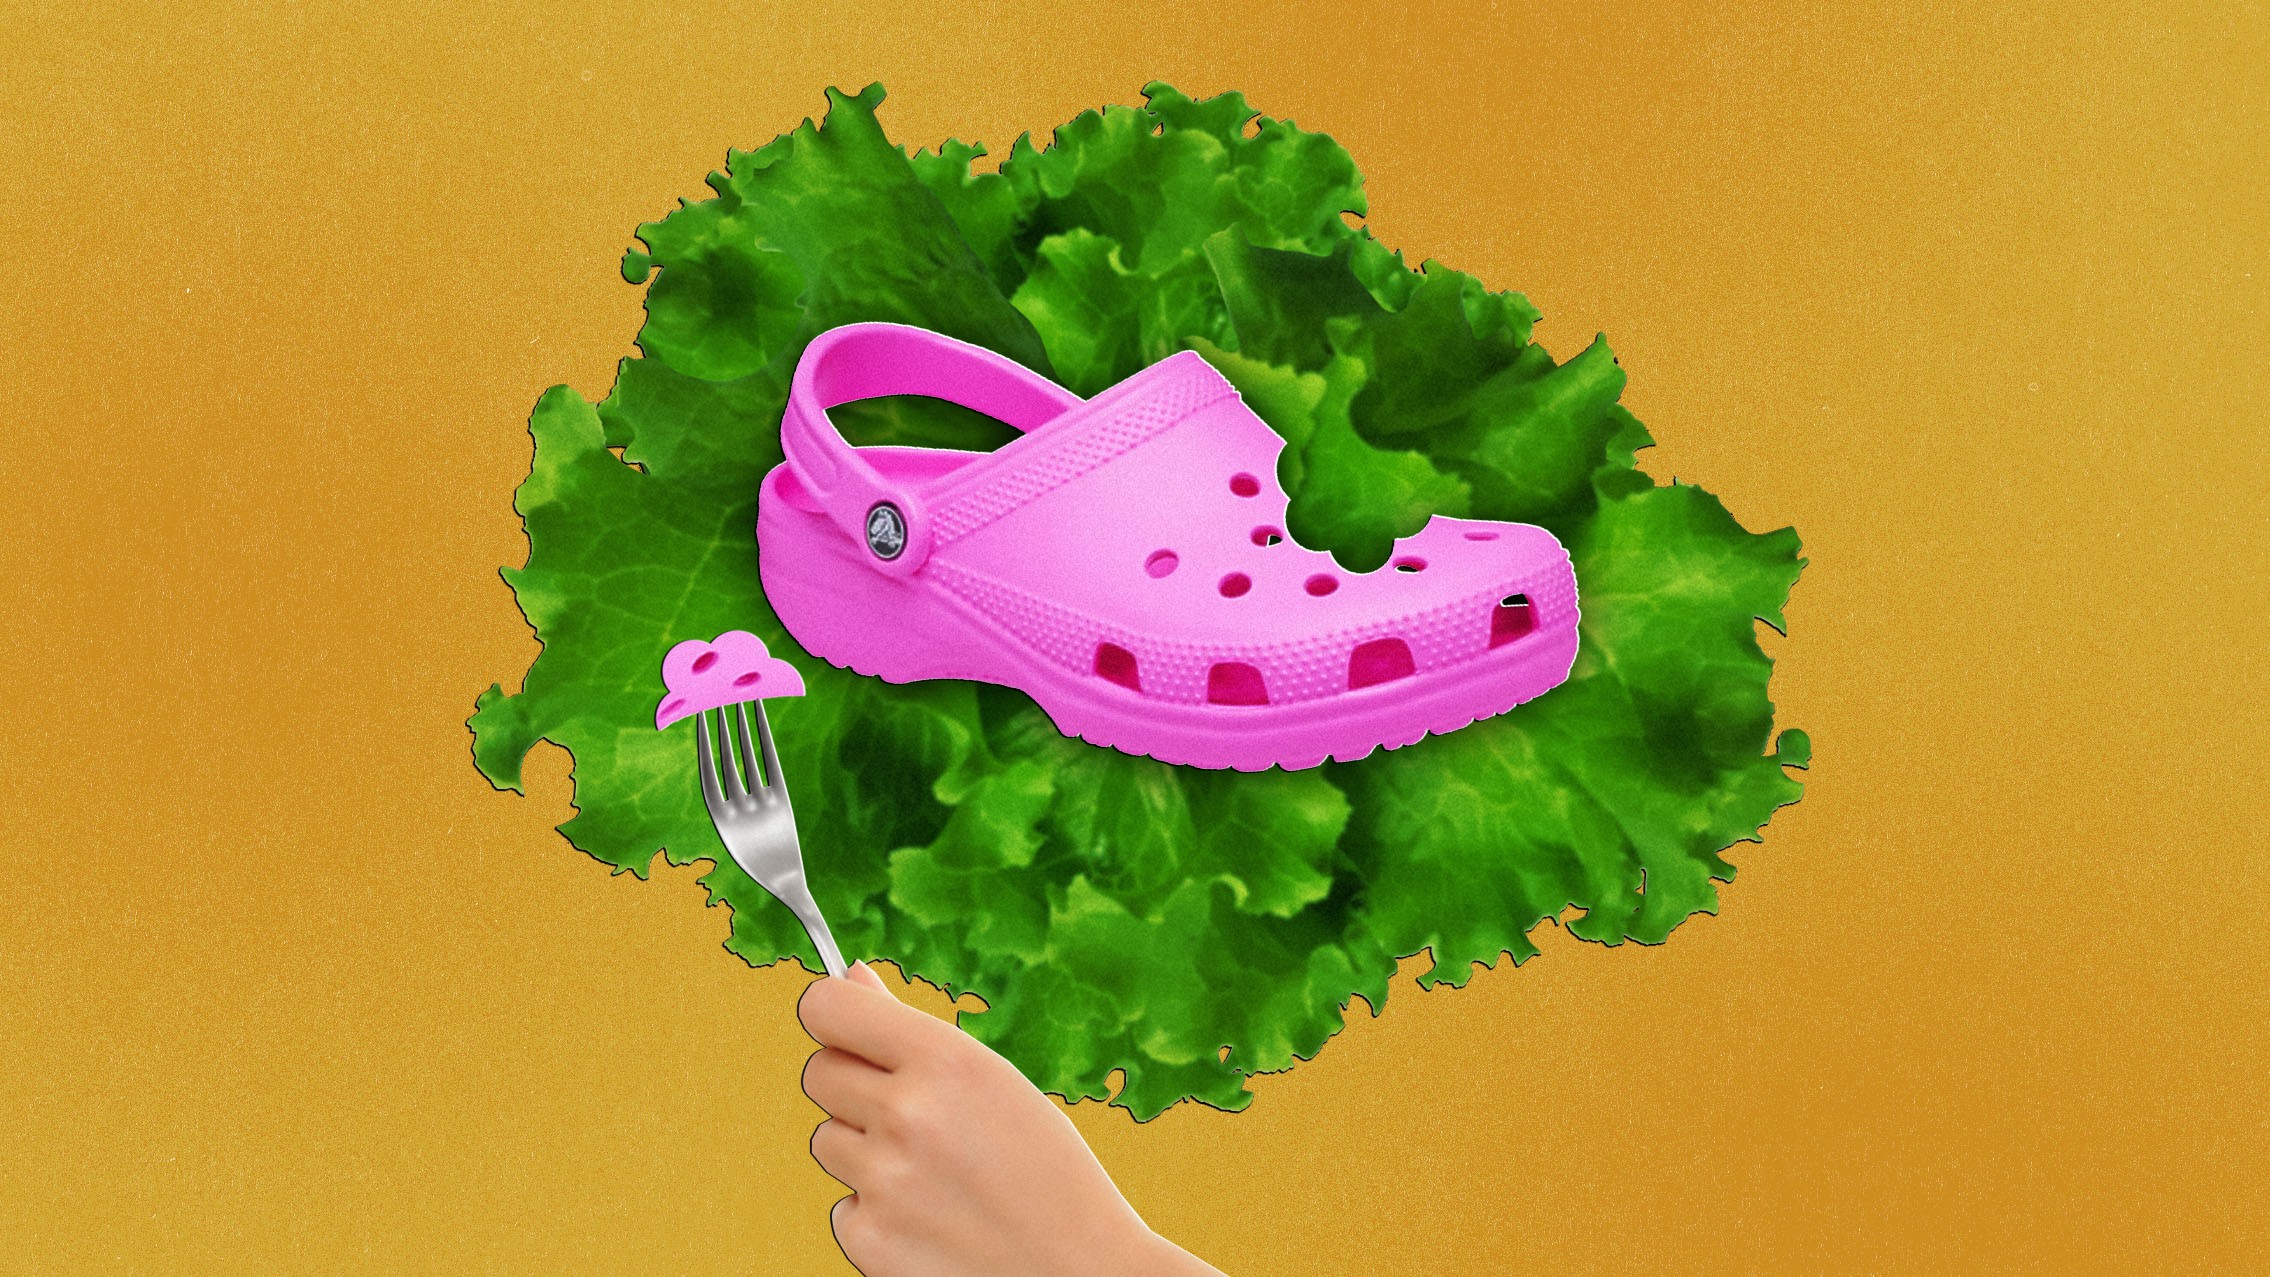 Can You Eat Crocs? An Investigation